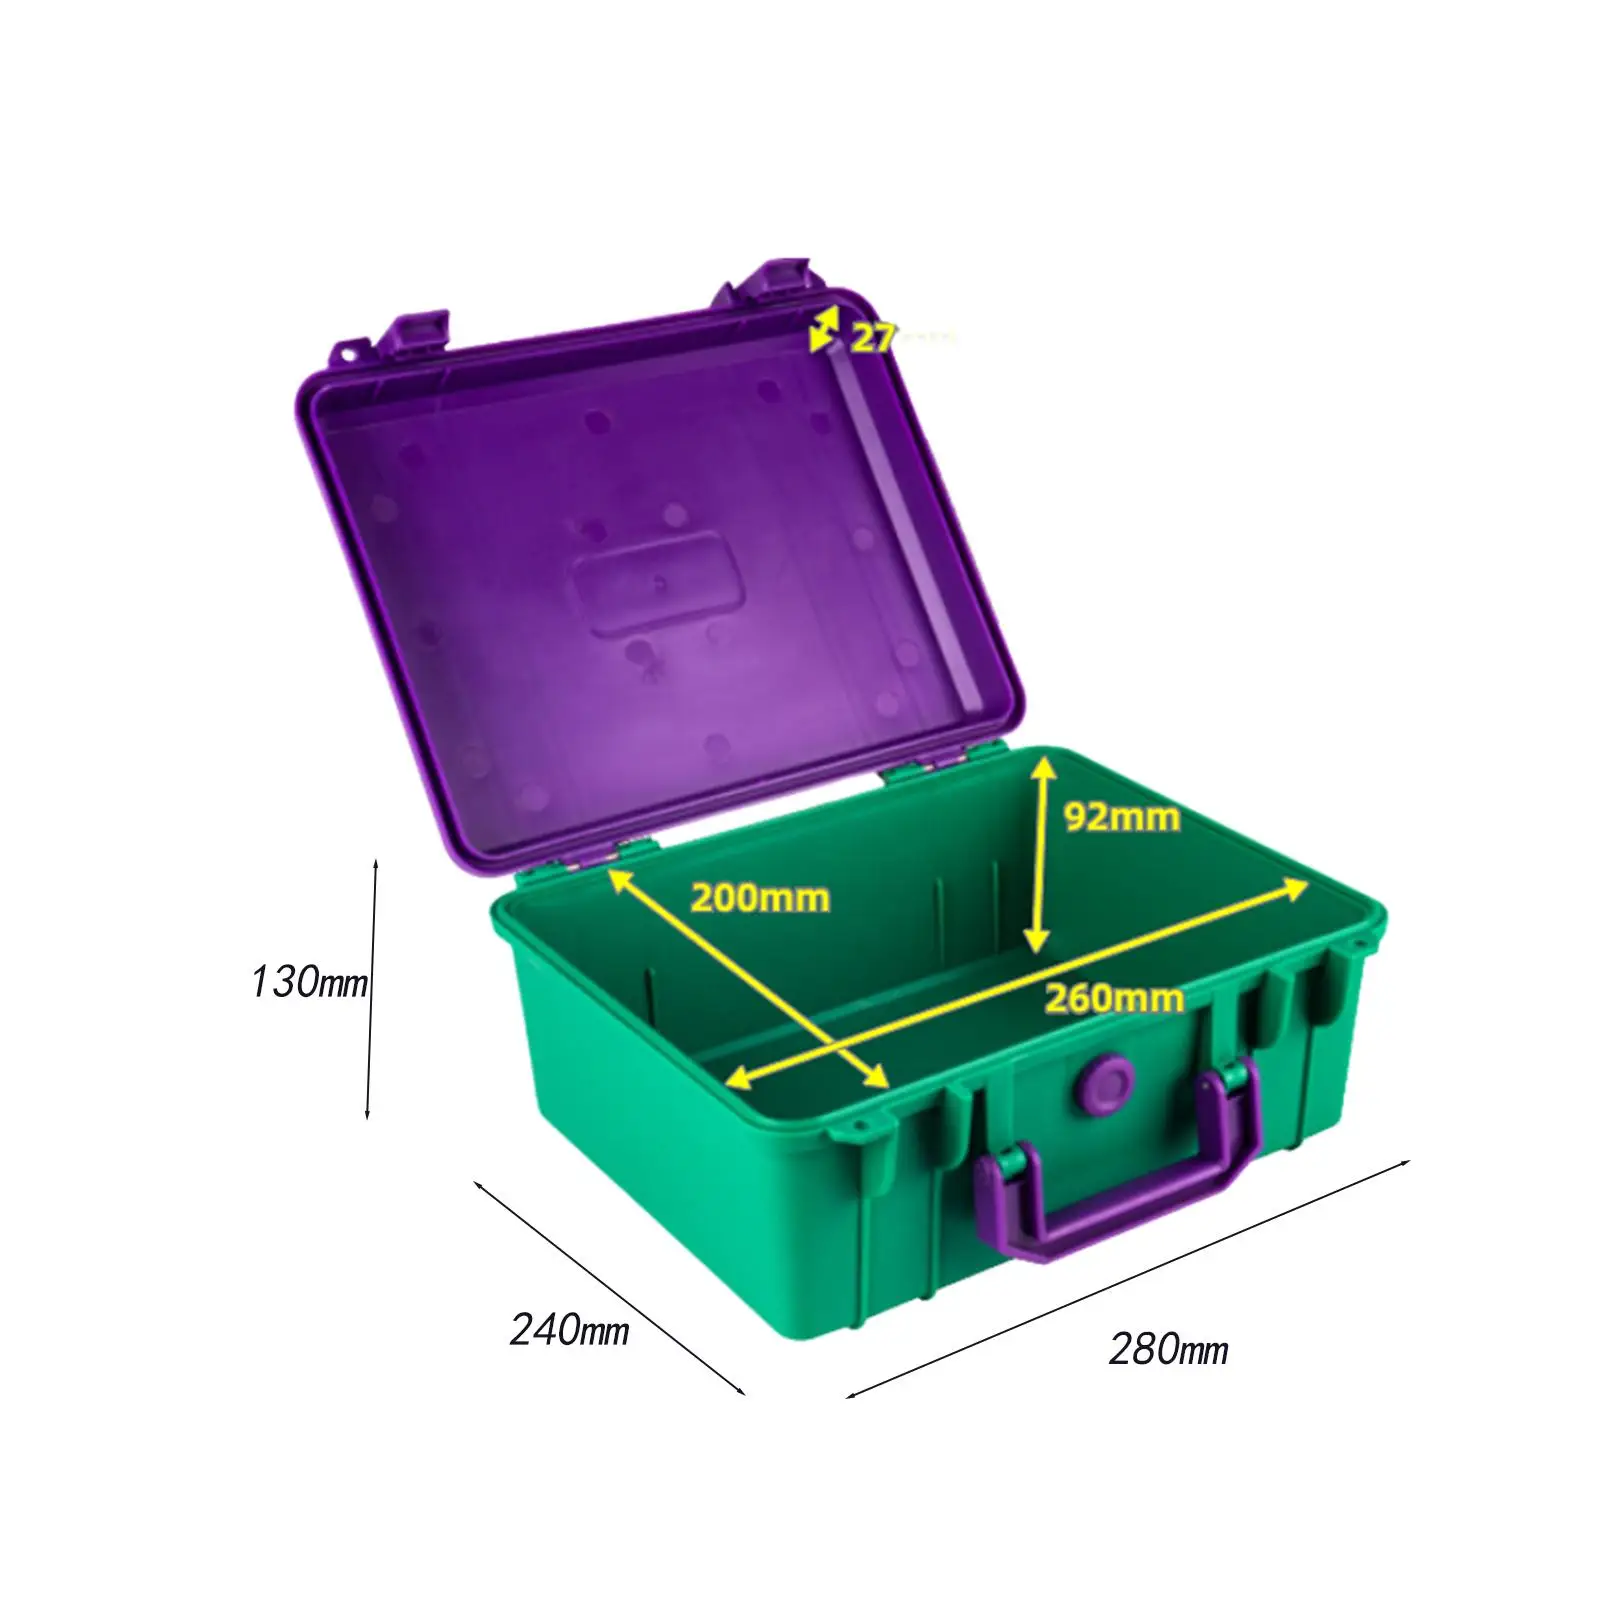 Sealed Waterproof Box Violet and Green 280x240x130mm Hardware Equipment Storage Portable Impact Resistant Weatherproof Hard Case